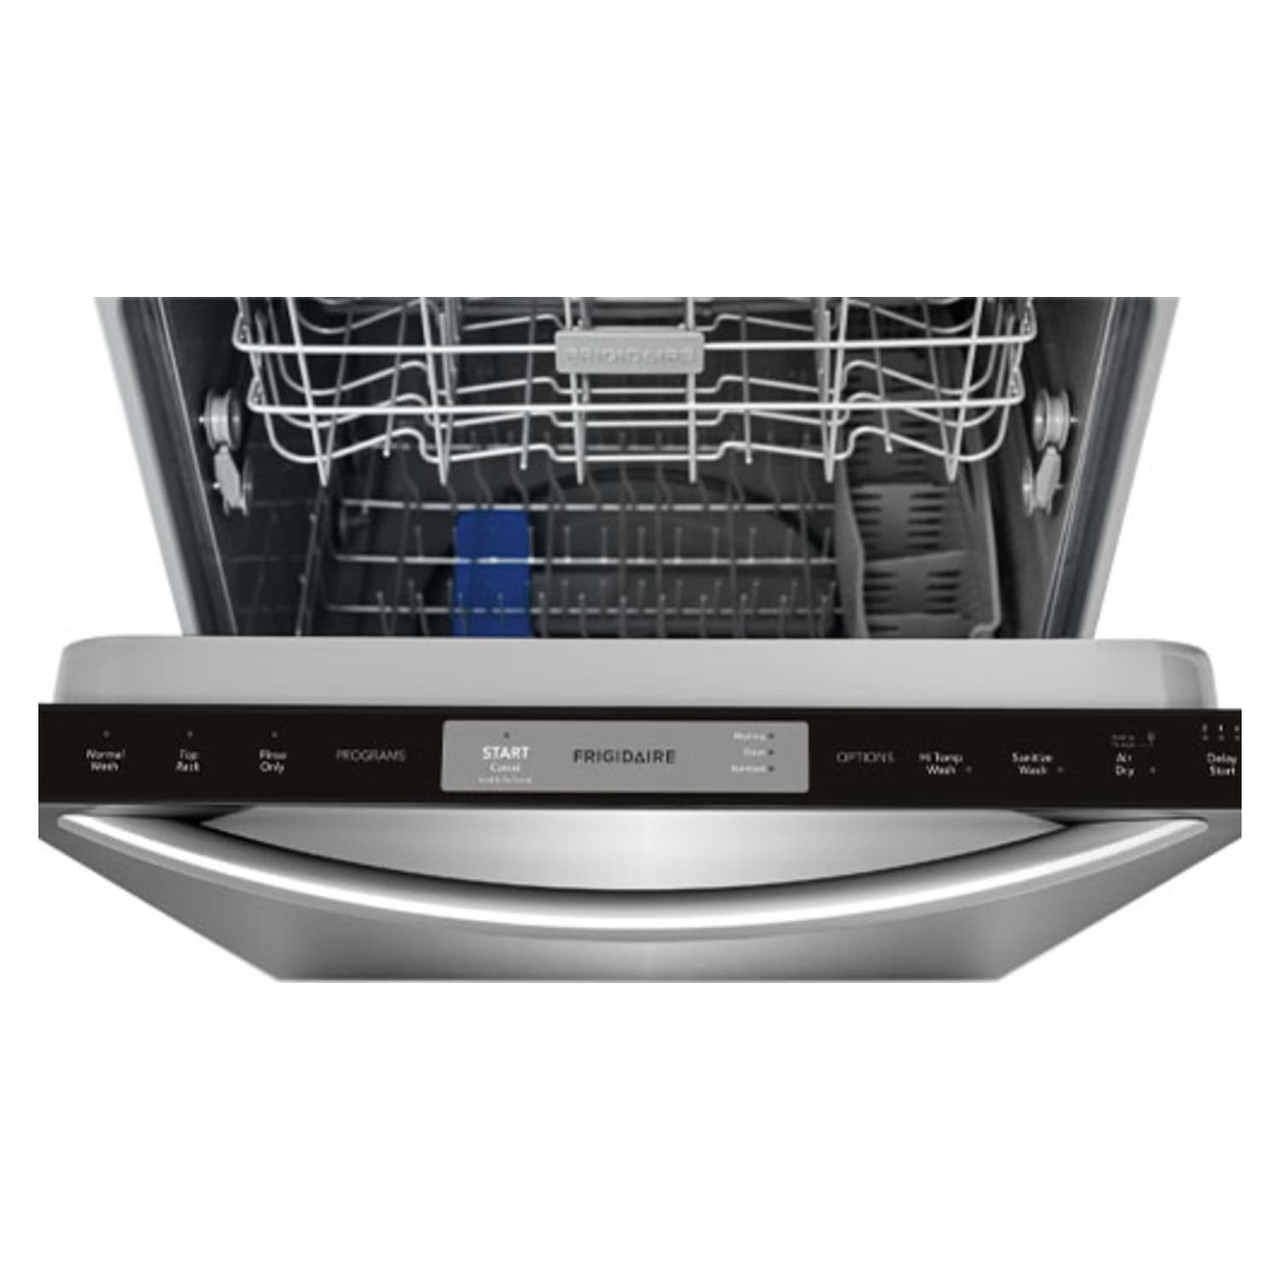 Frigidaire 24” Built-In Dishwasher Stainless Steel